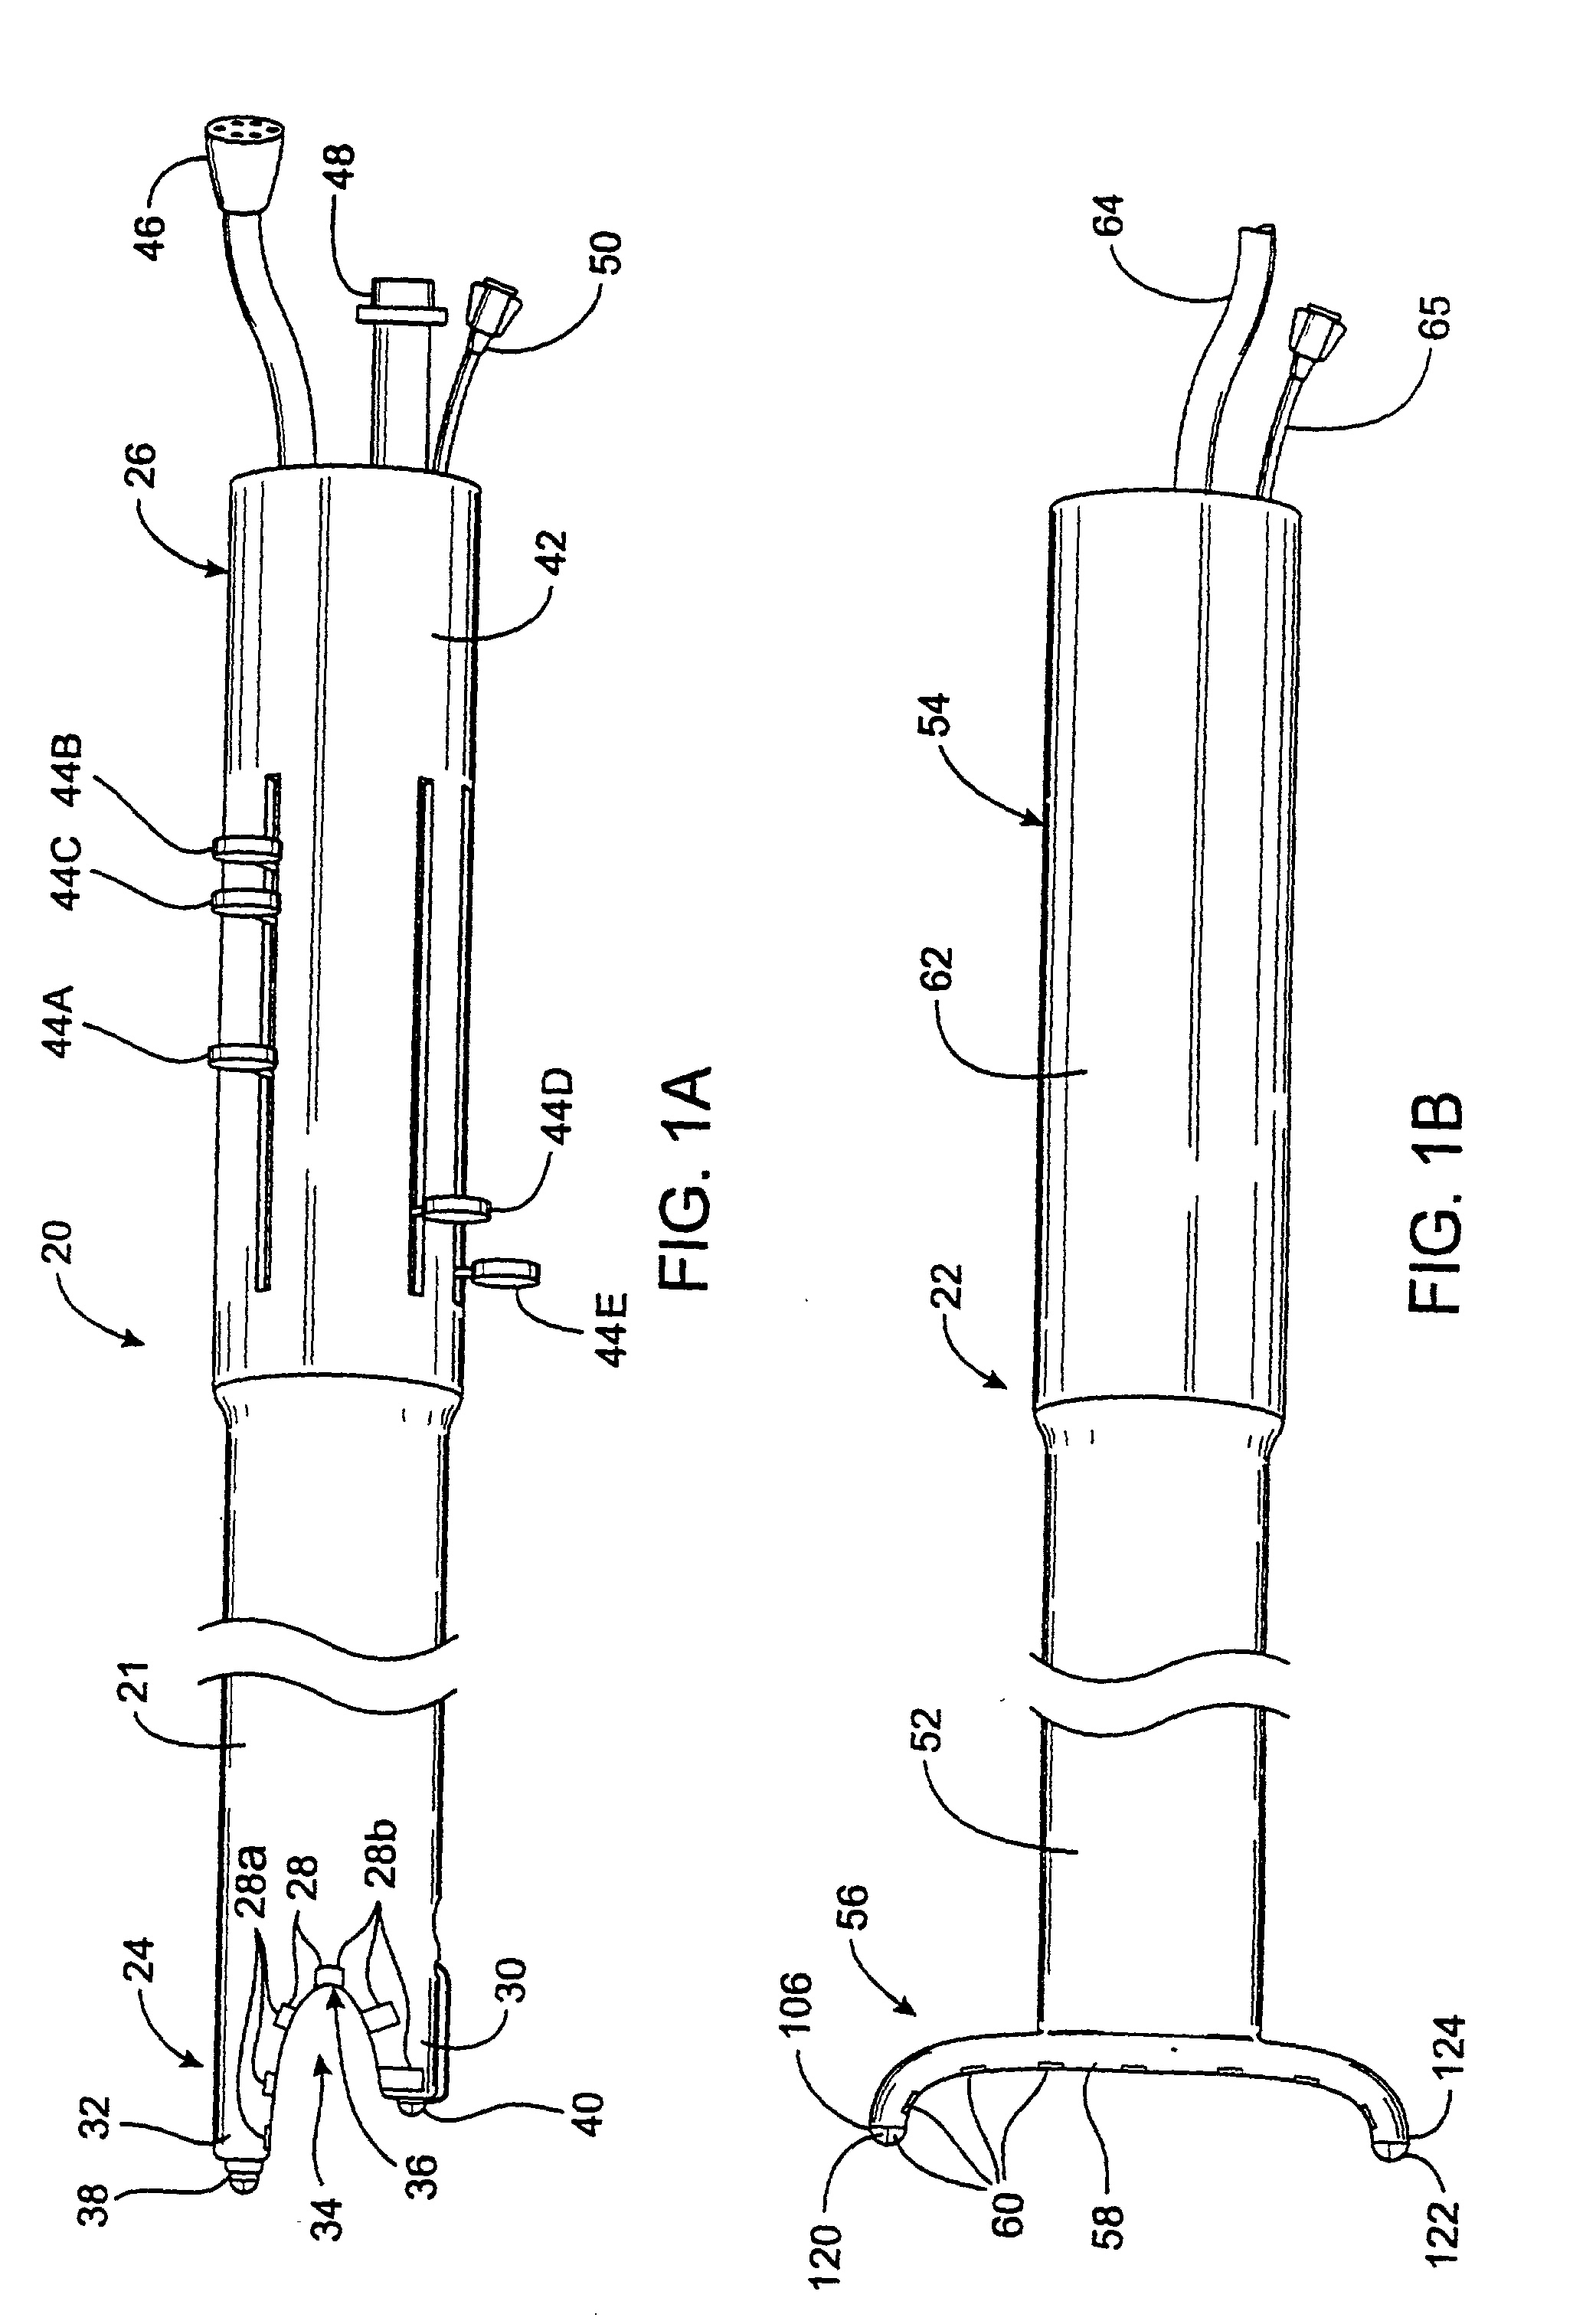 Device and method for forming a lesion